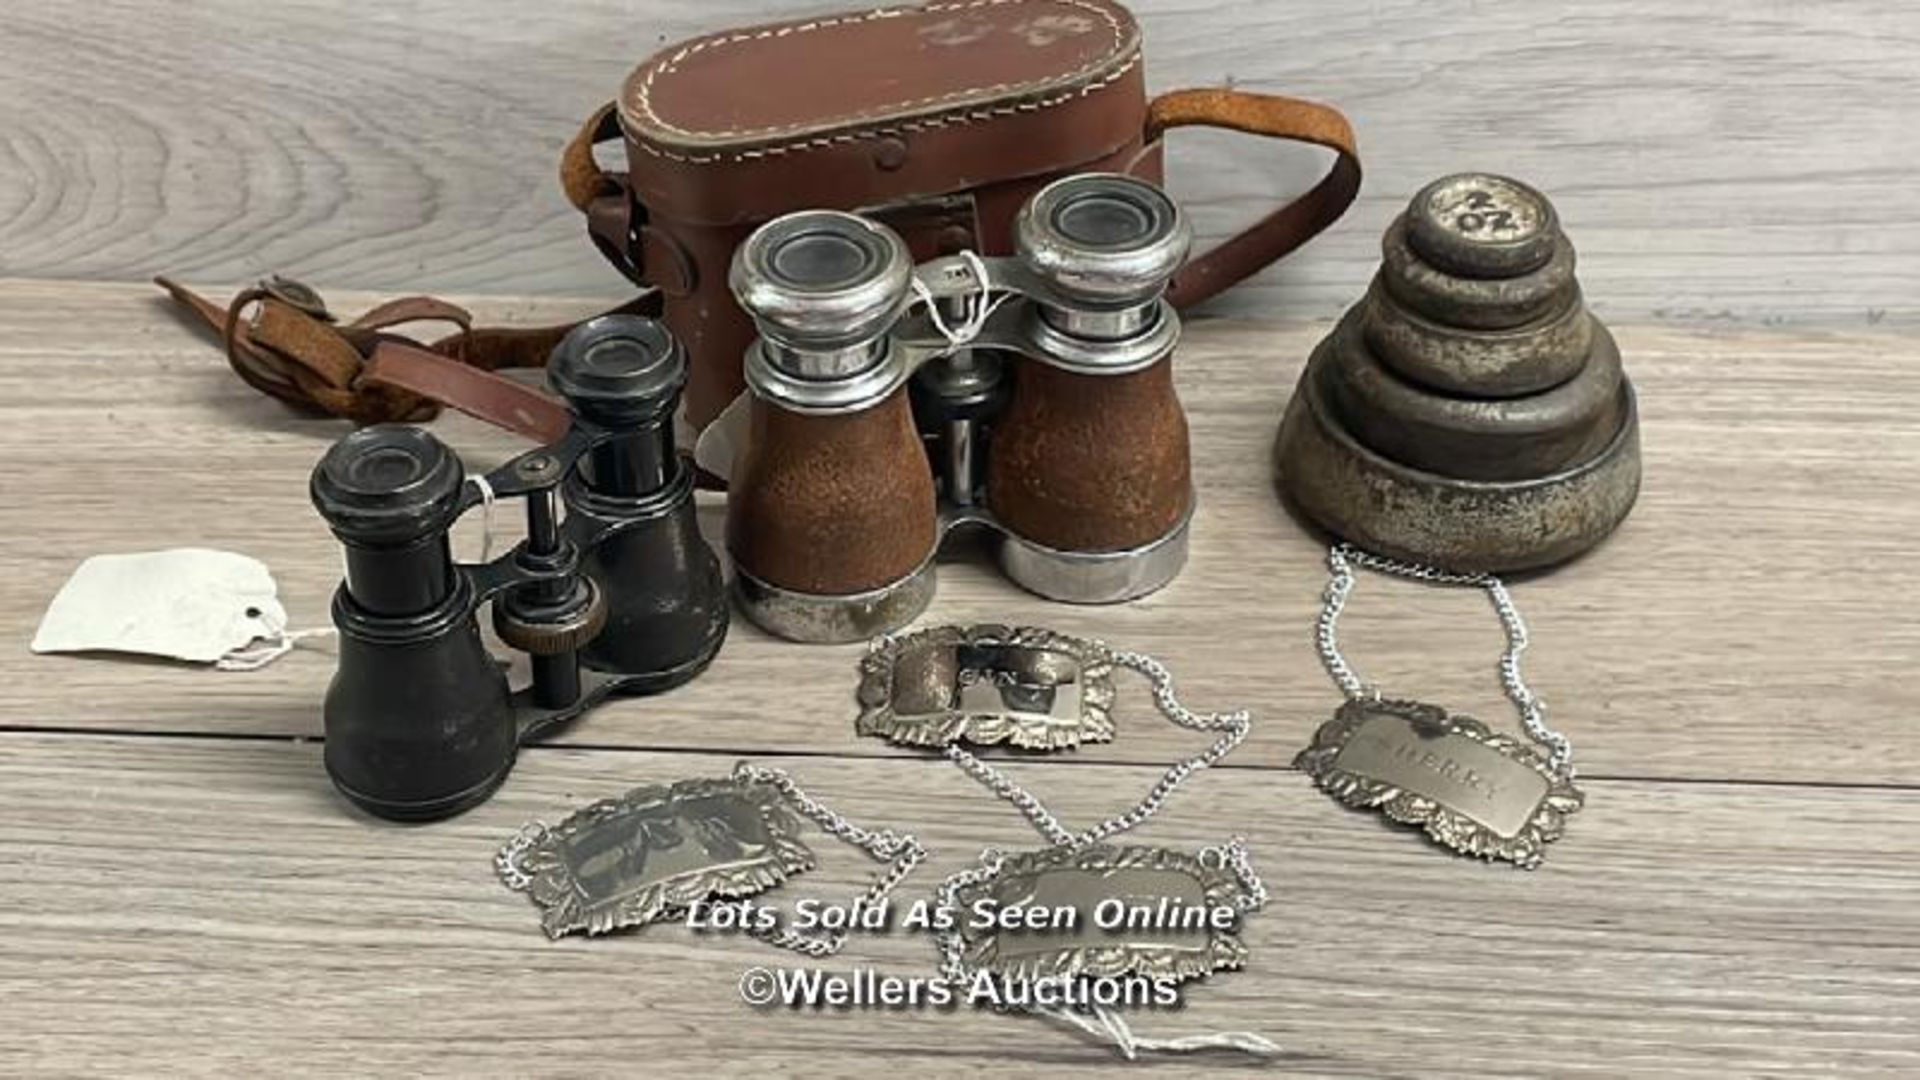 ASSORTED VINTAGE ITEMS INCLUDING TWO BINOCULARS, SCALE WEIGHTS AND METAL BOTTLE LABELS